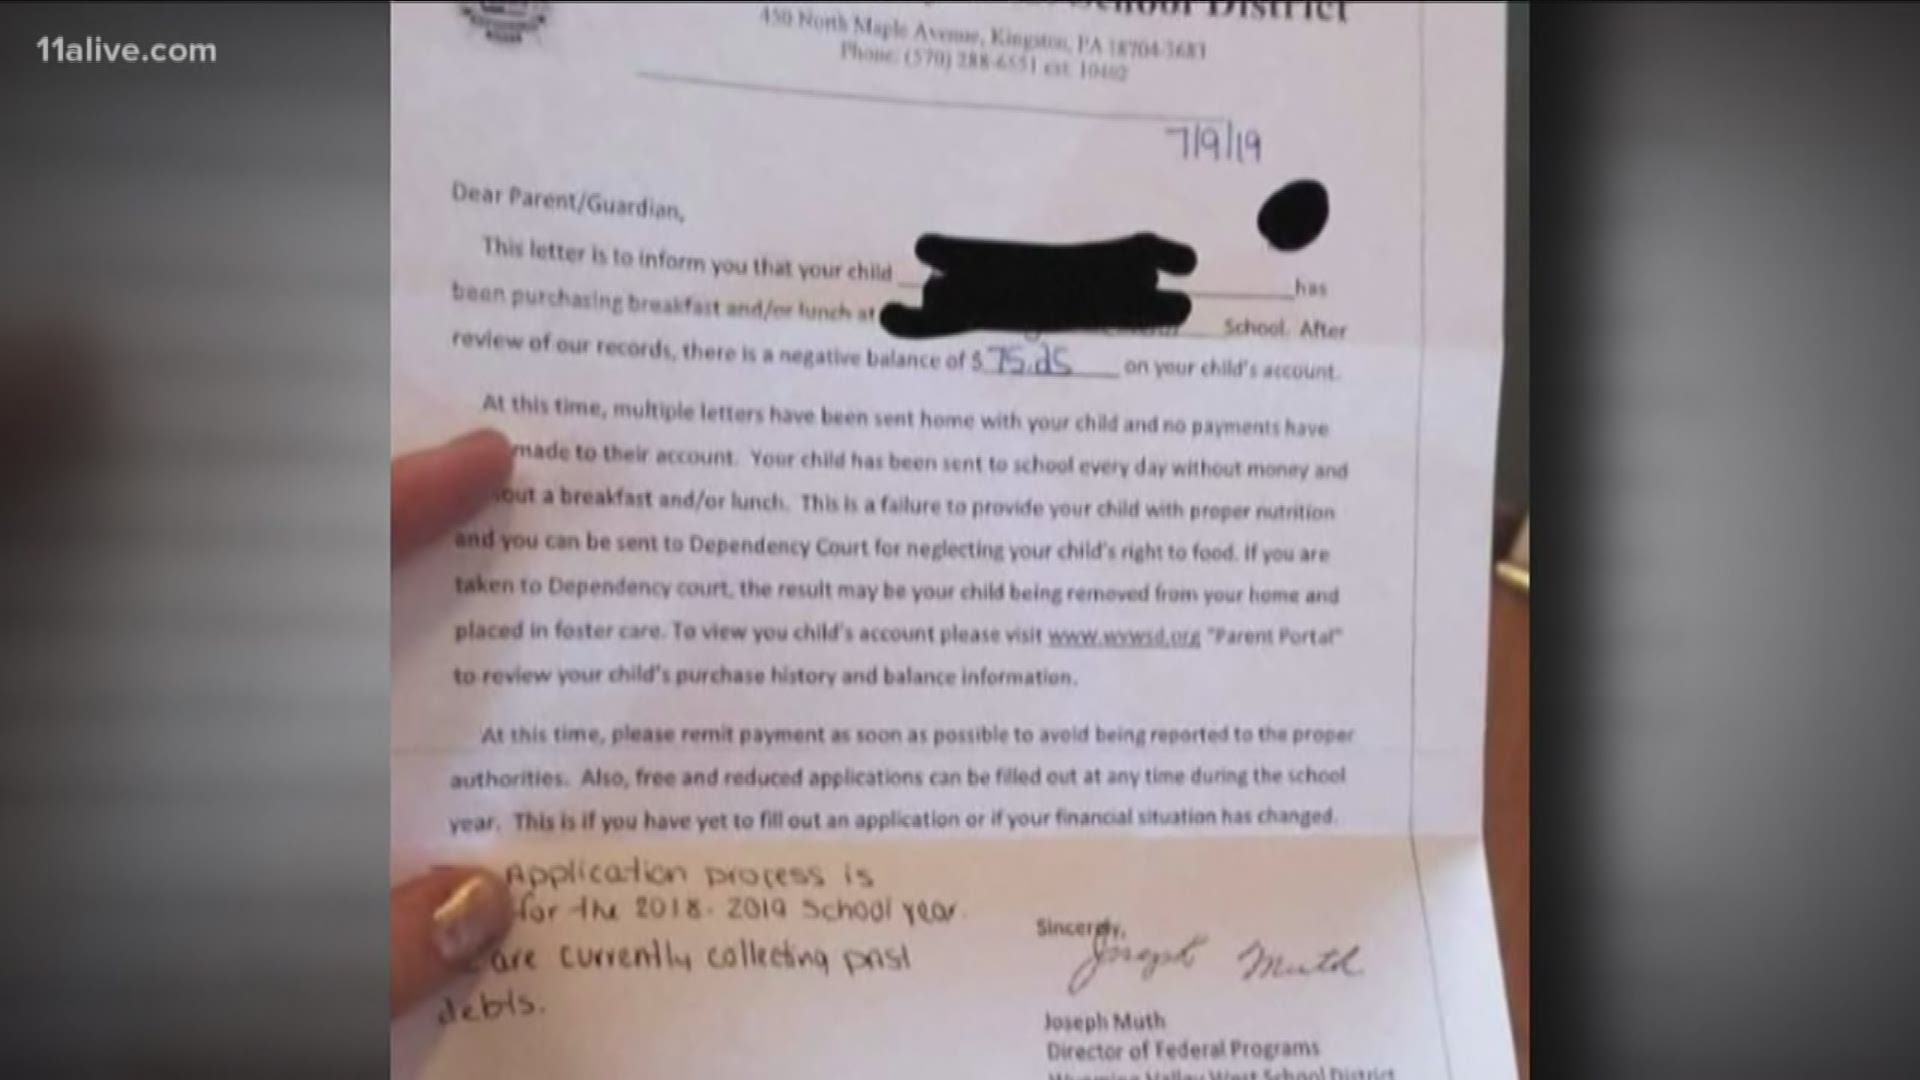 1920px x 1080px - People react to letter threatening parents if they don't settle lunch debts  | 11alive.com